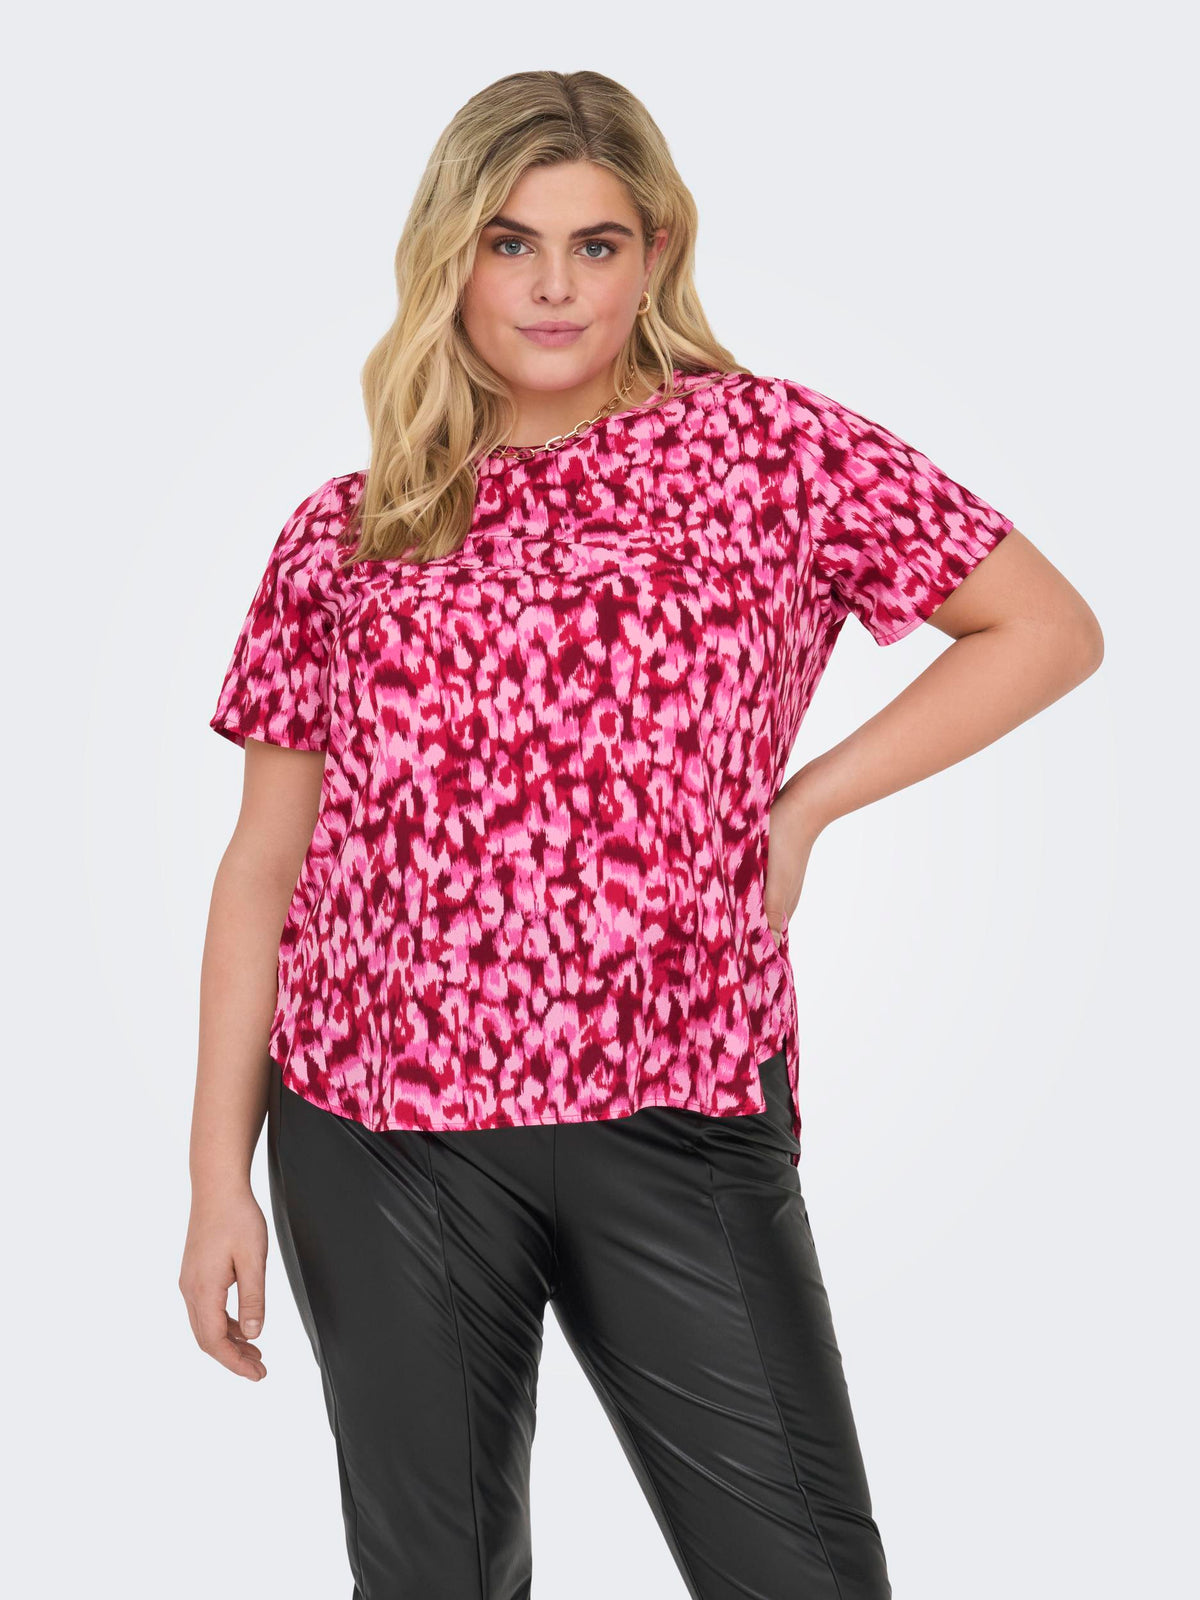 Only Carmakoma Pink Leopard Top